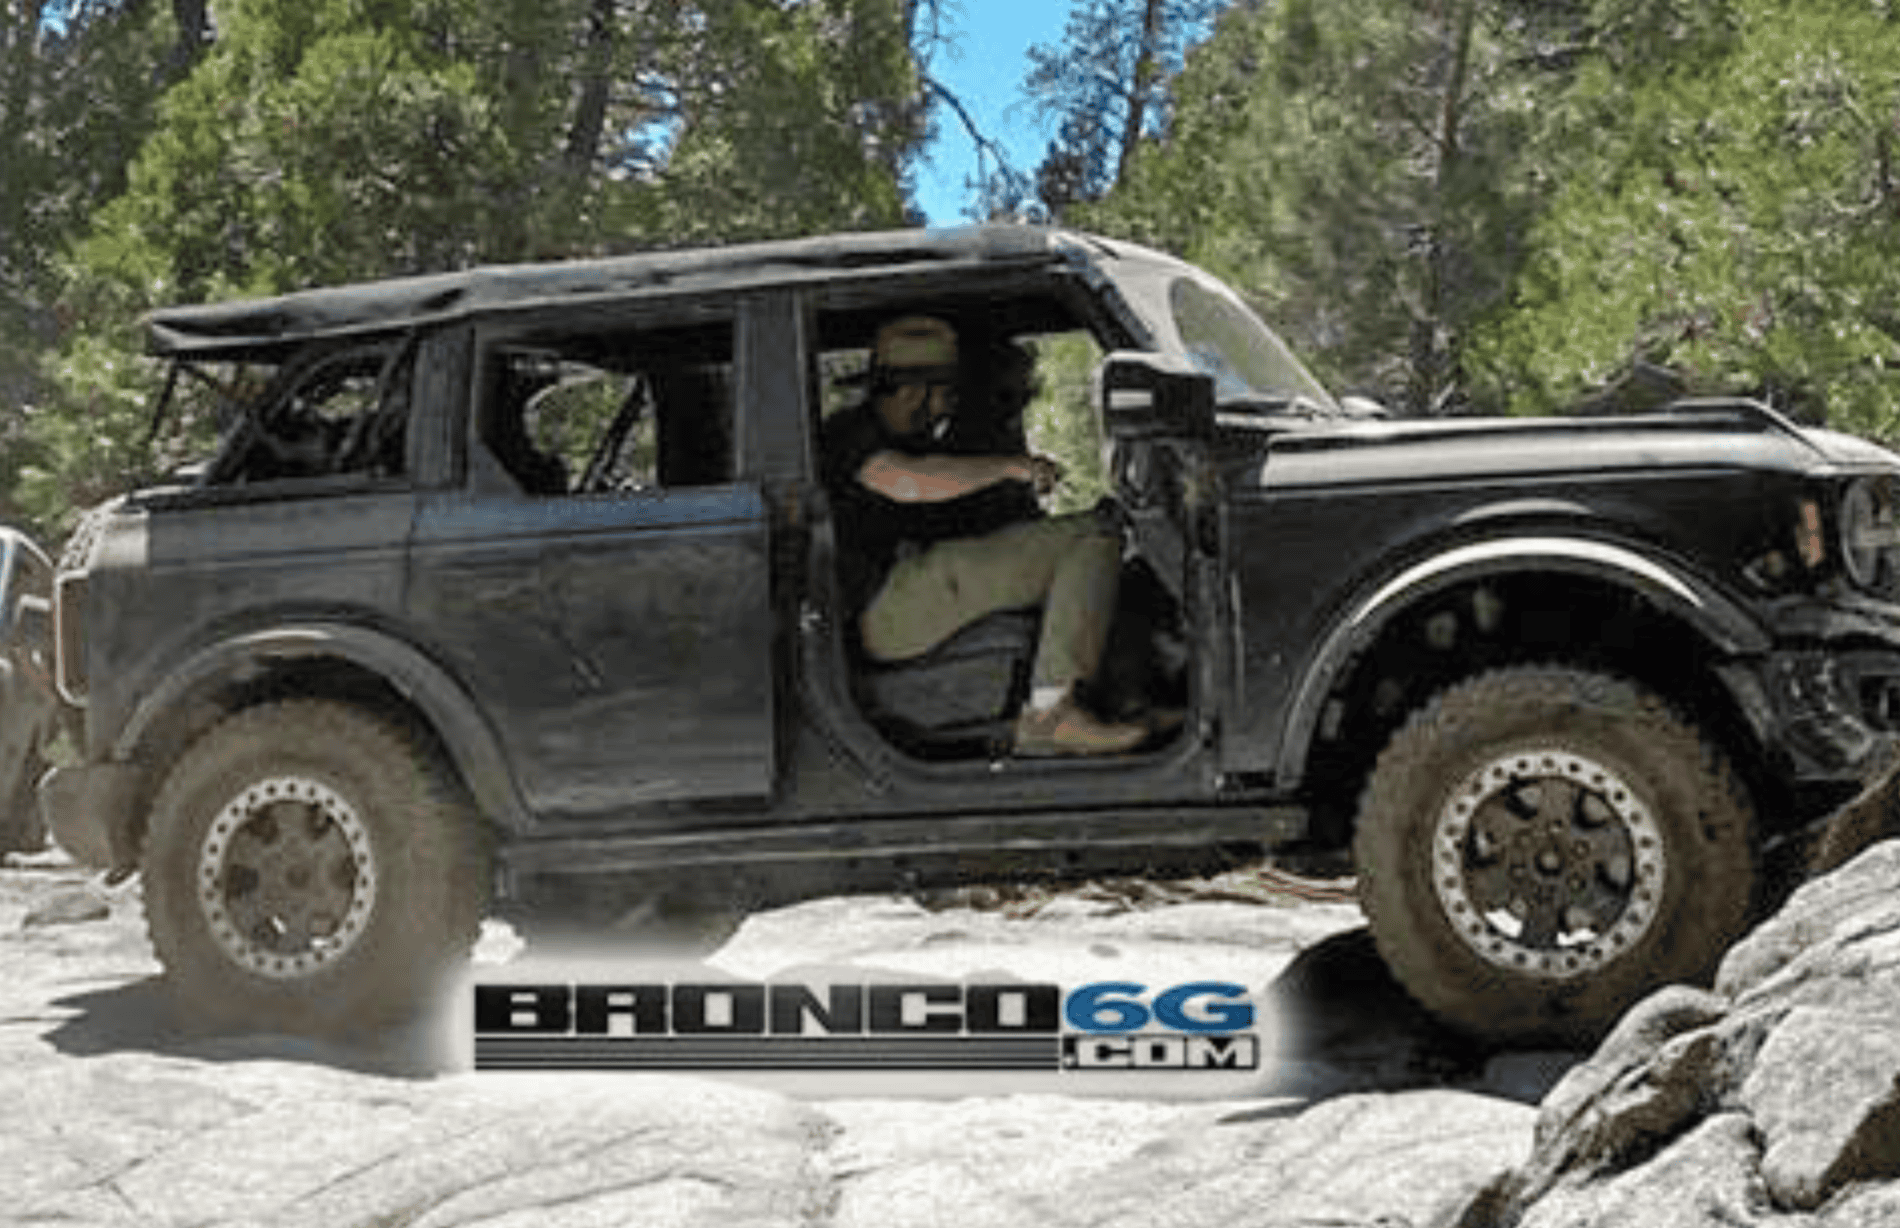 Ford Bronco Soft Top Screen Shot 2020-08-05 at 2.00.24 PM